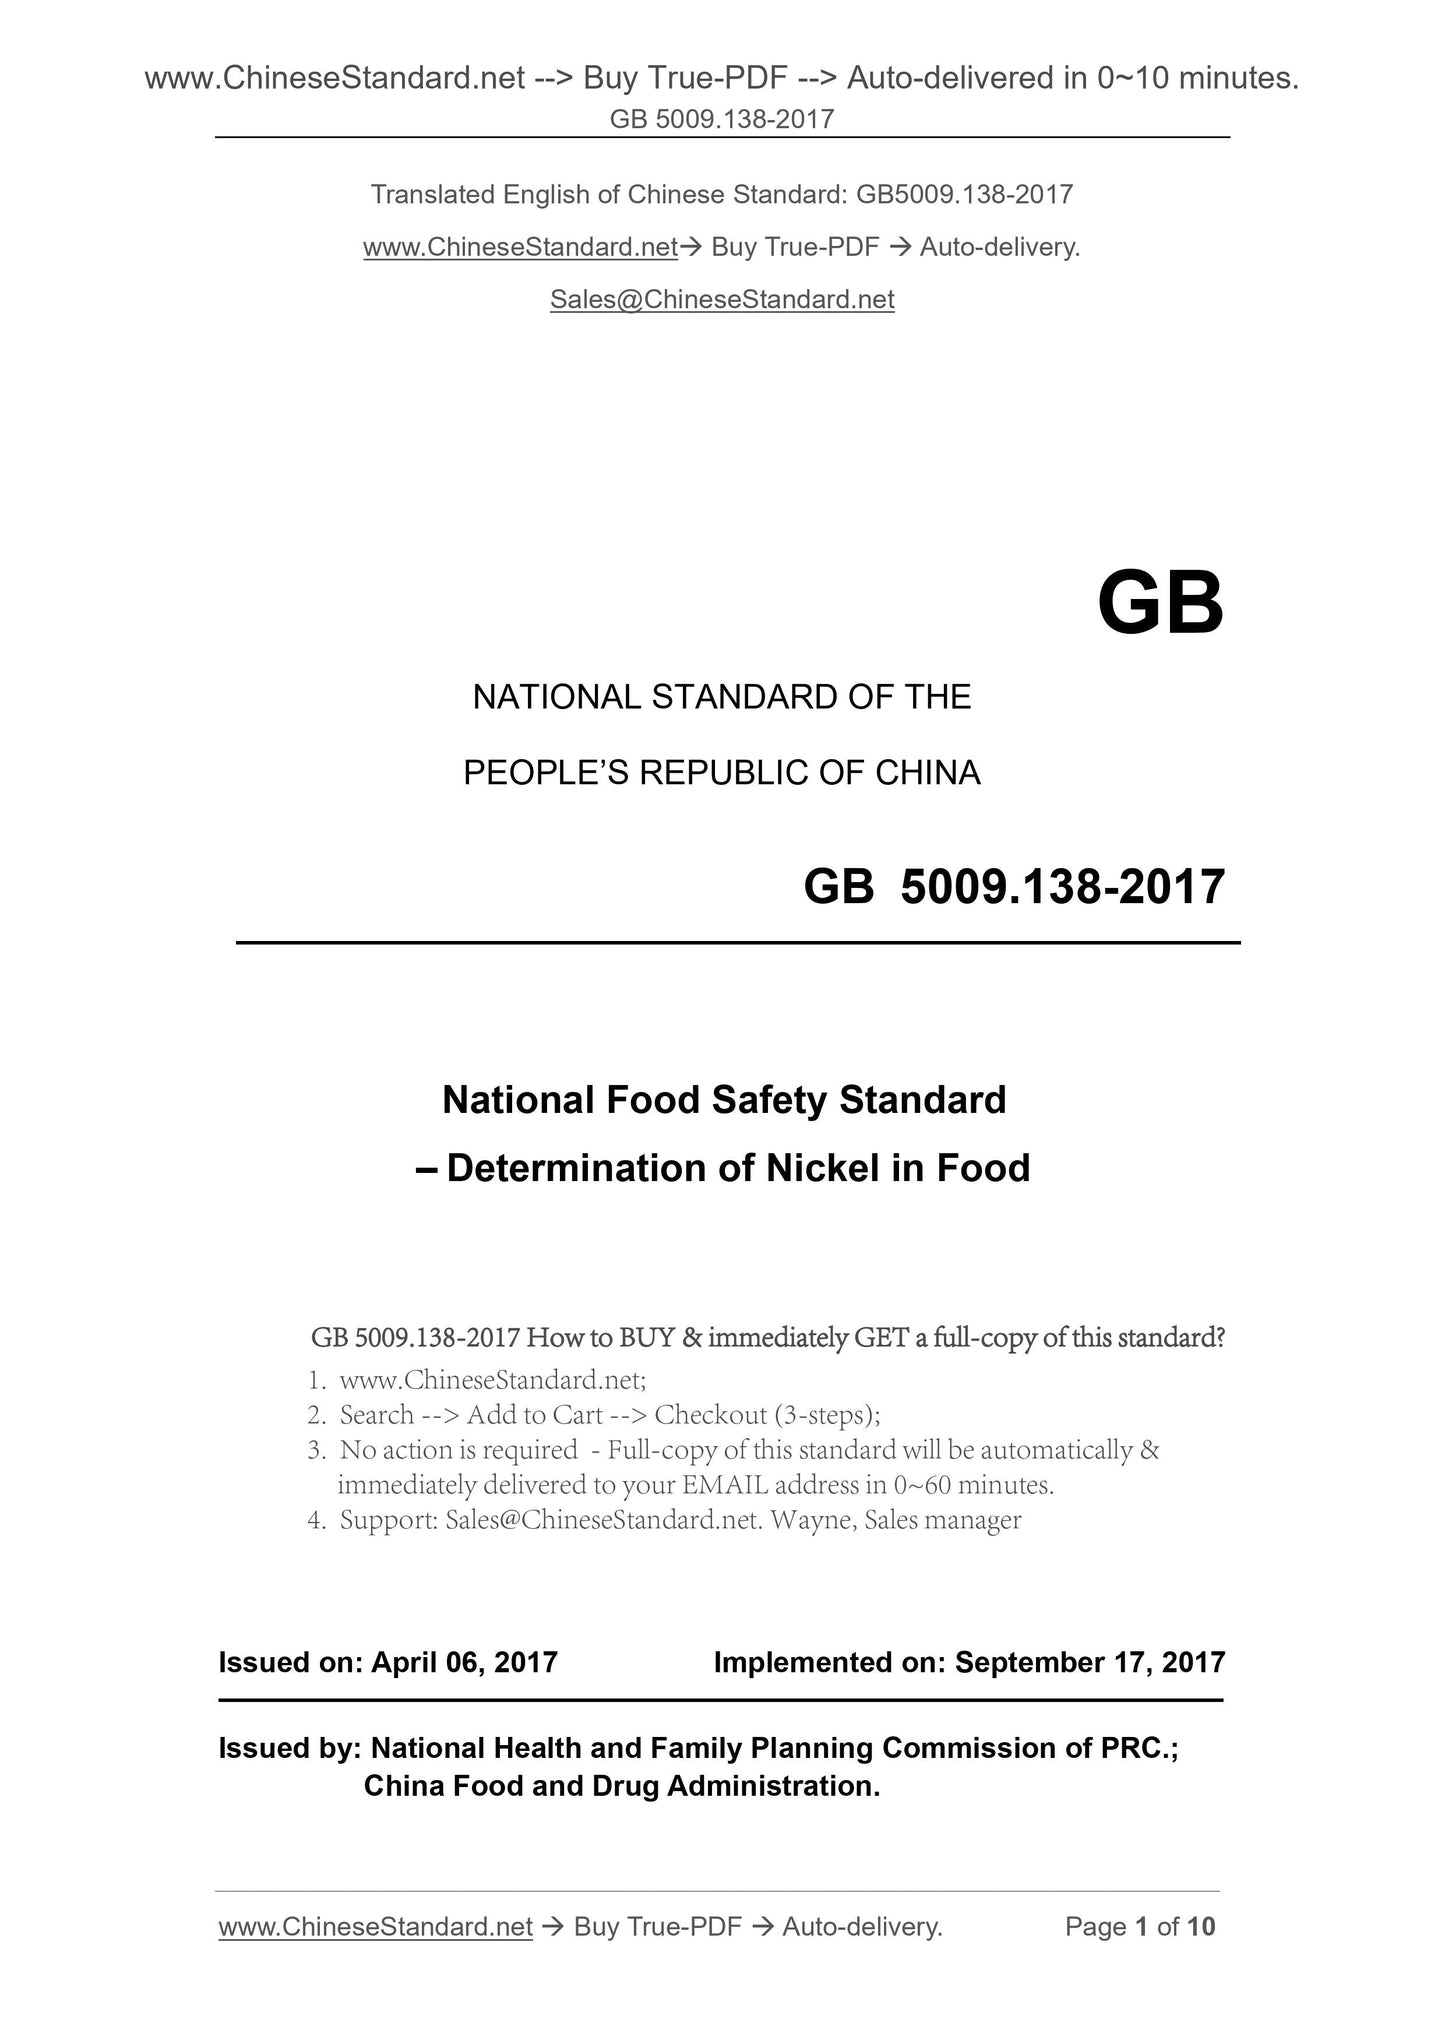 GB 5009.138-2017 Page 1